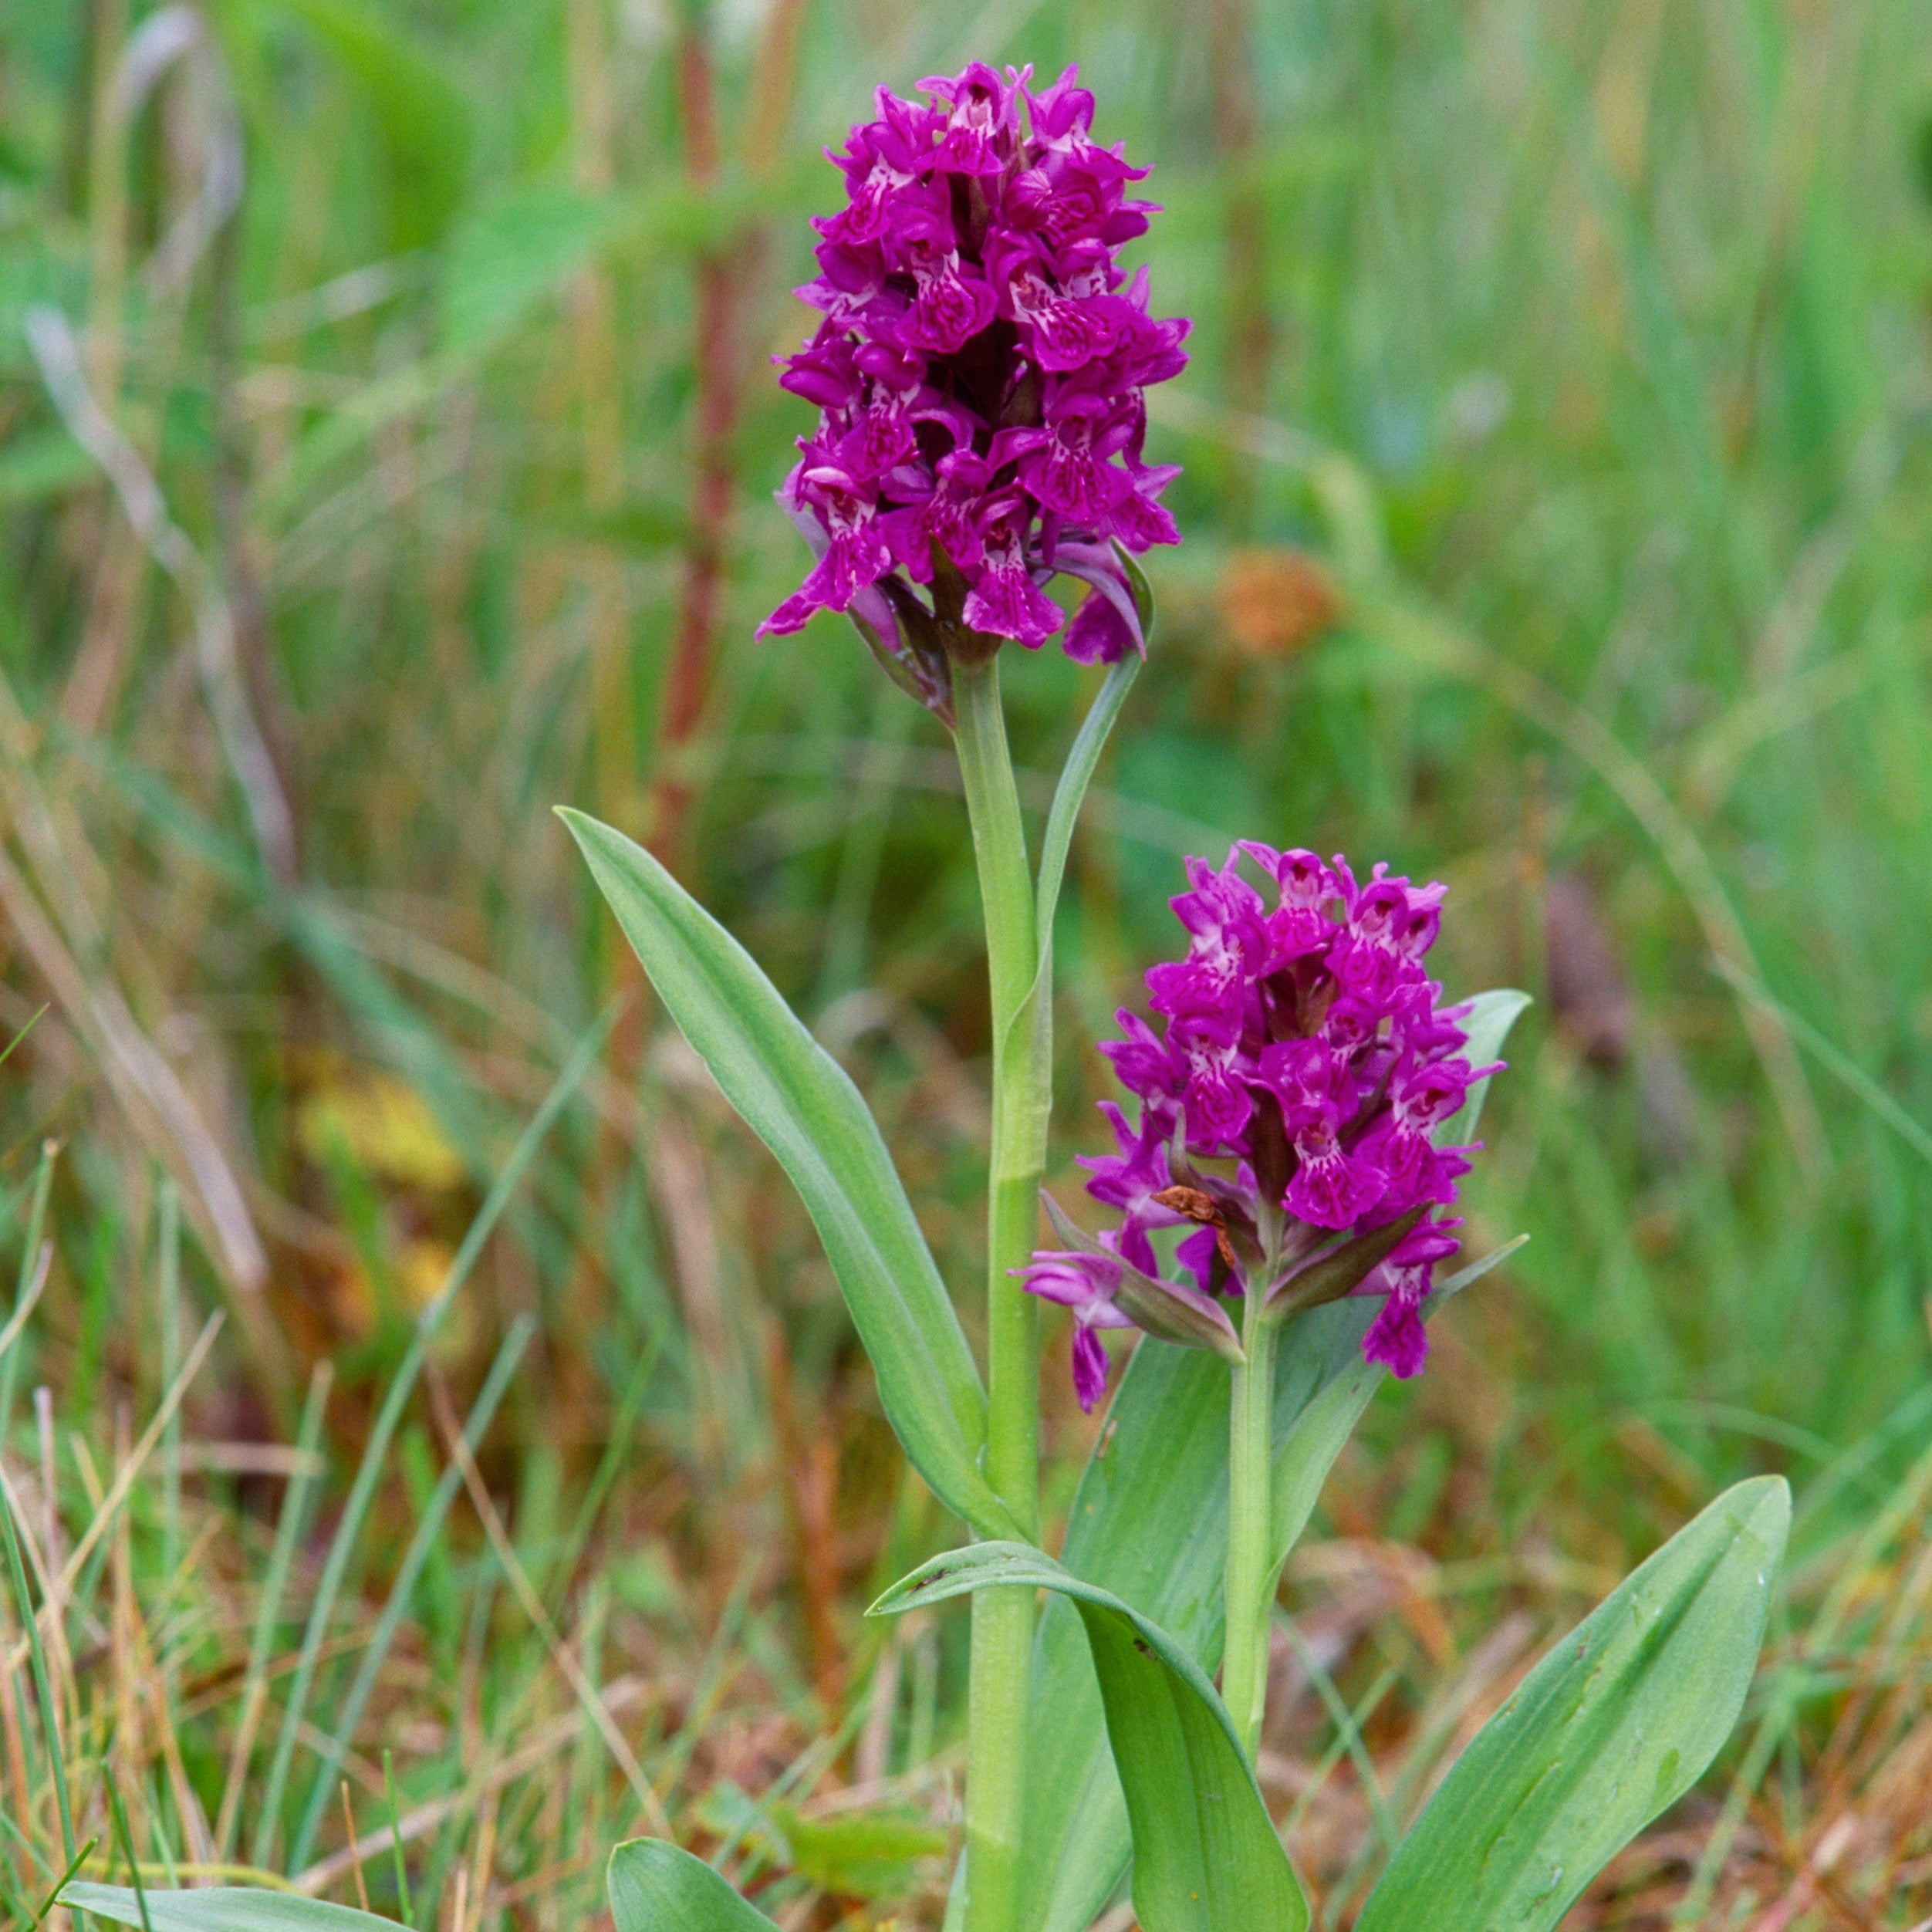 Northern marsh orchid (c) Laurie Campbell